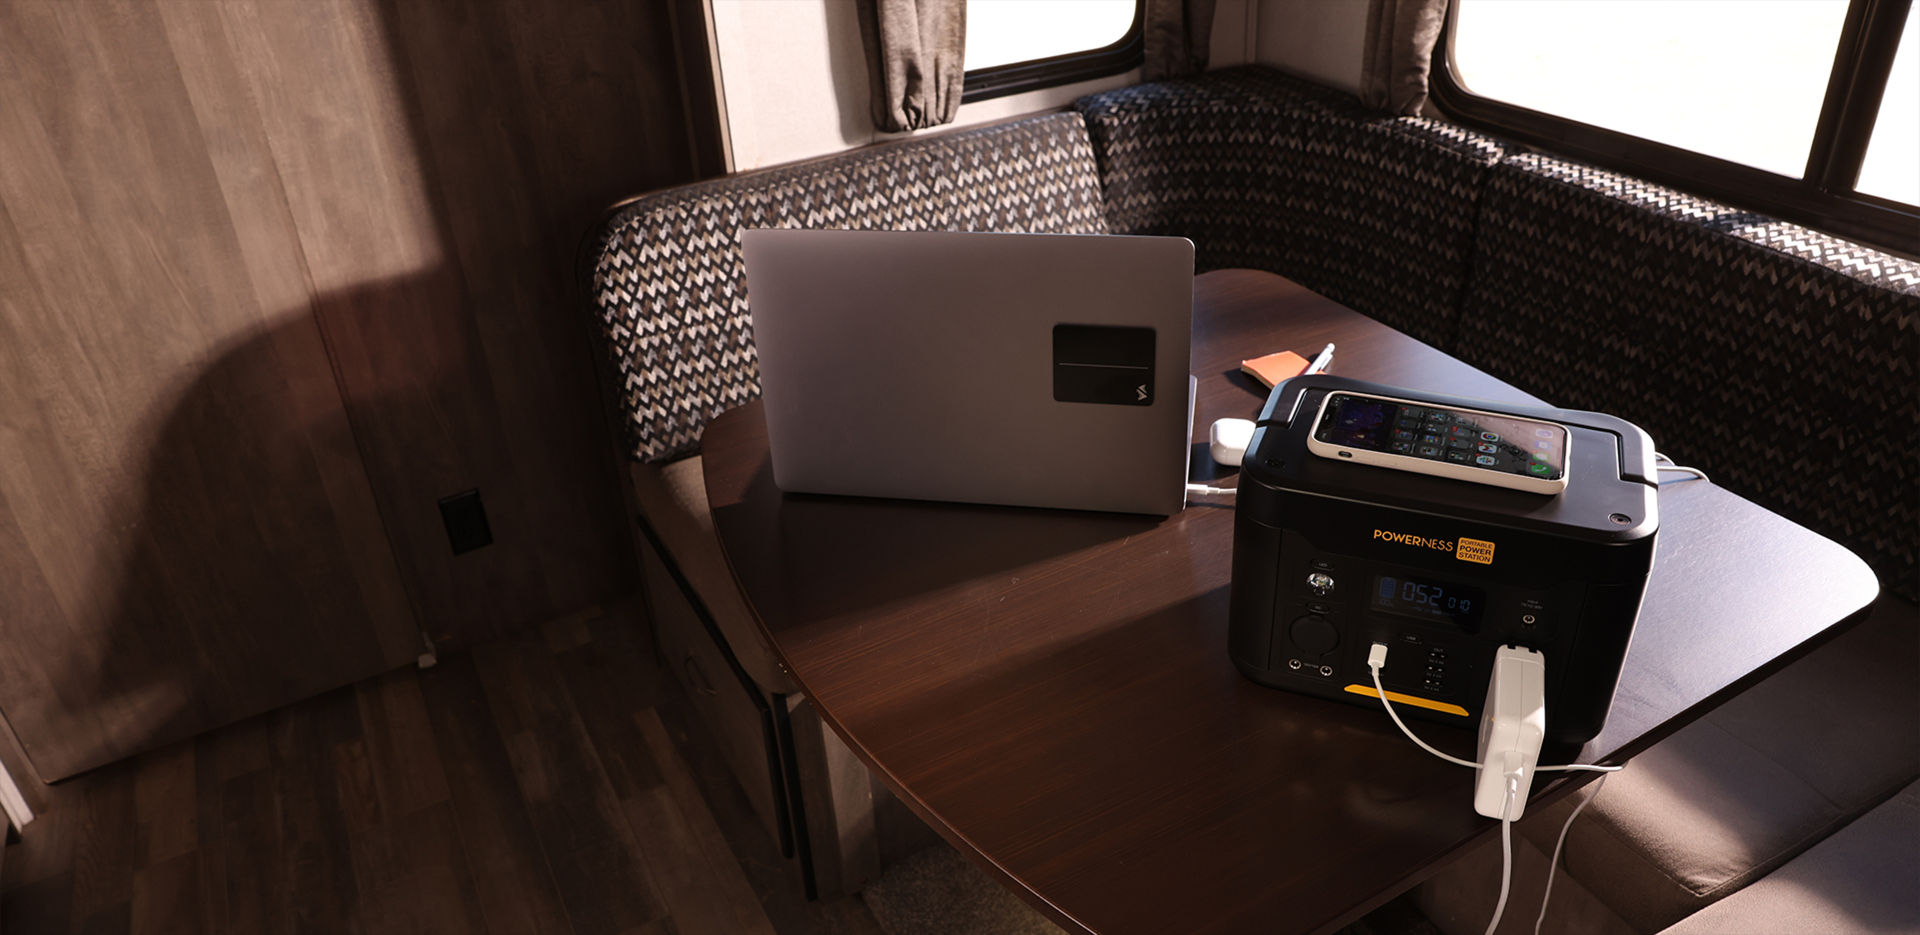 Powerness Hiker U1000: Power station placed on RV dining table, providing laptop charging and convenient power source on the go. Backup Solar Generator